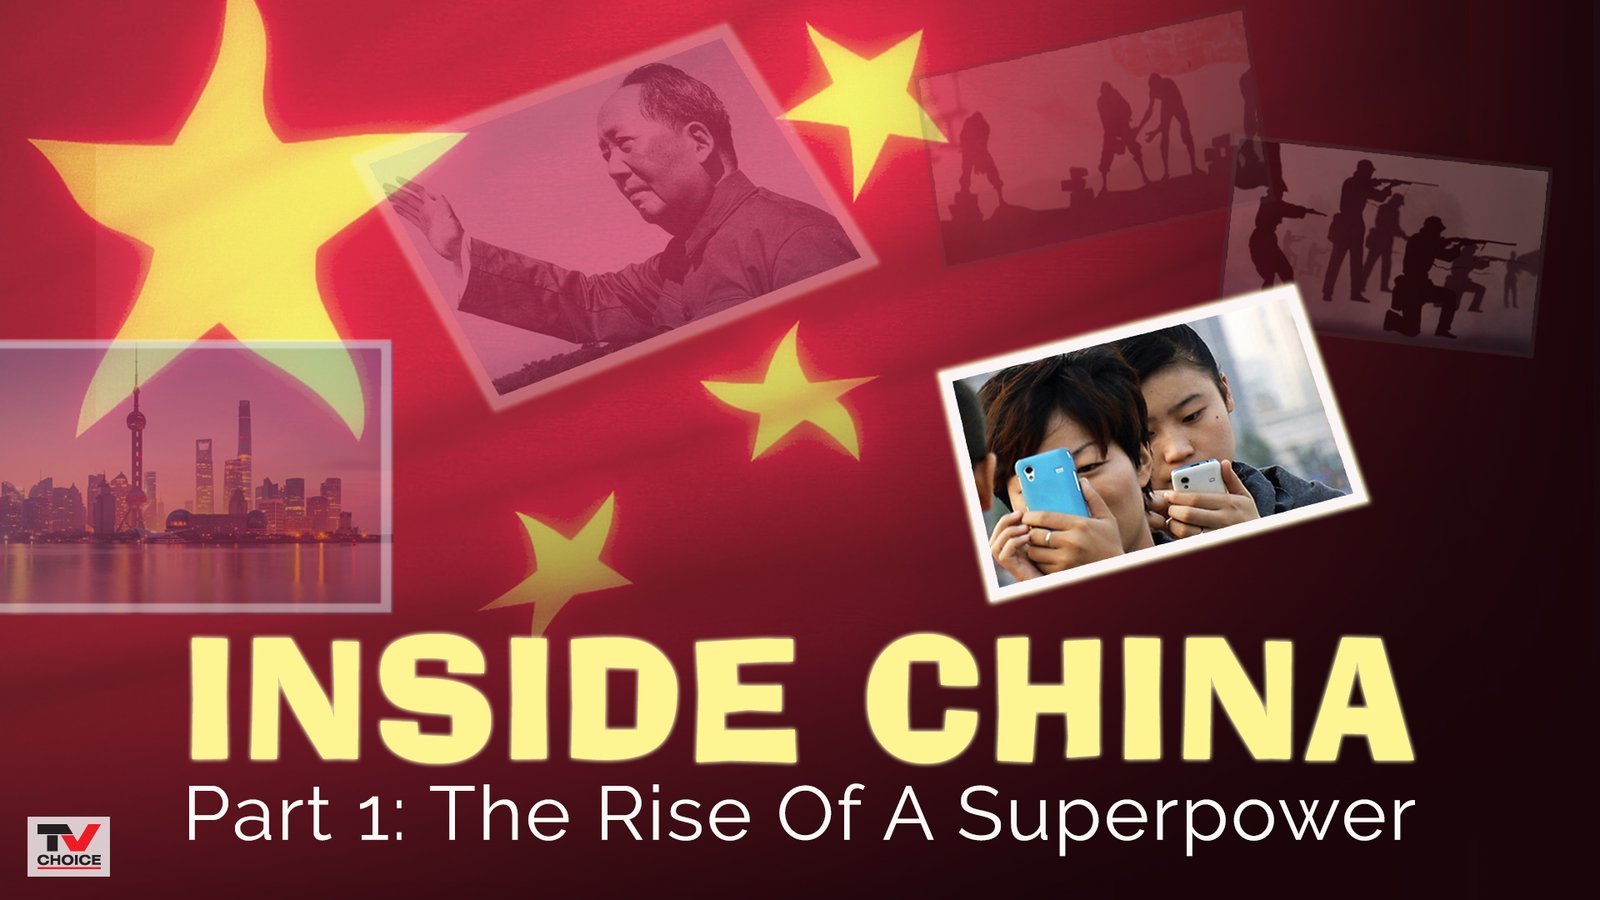 Inside China 1: The Rise Of A Superpower